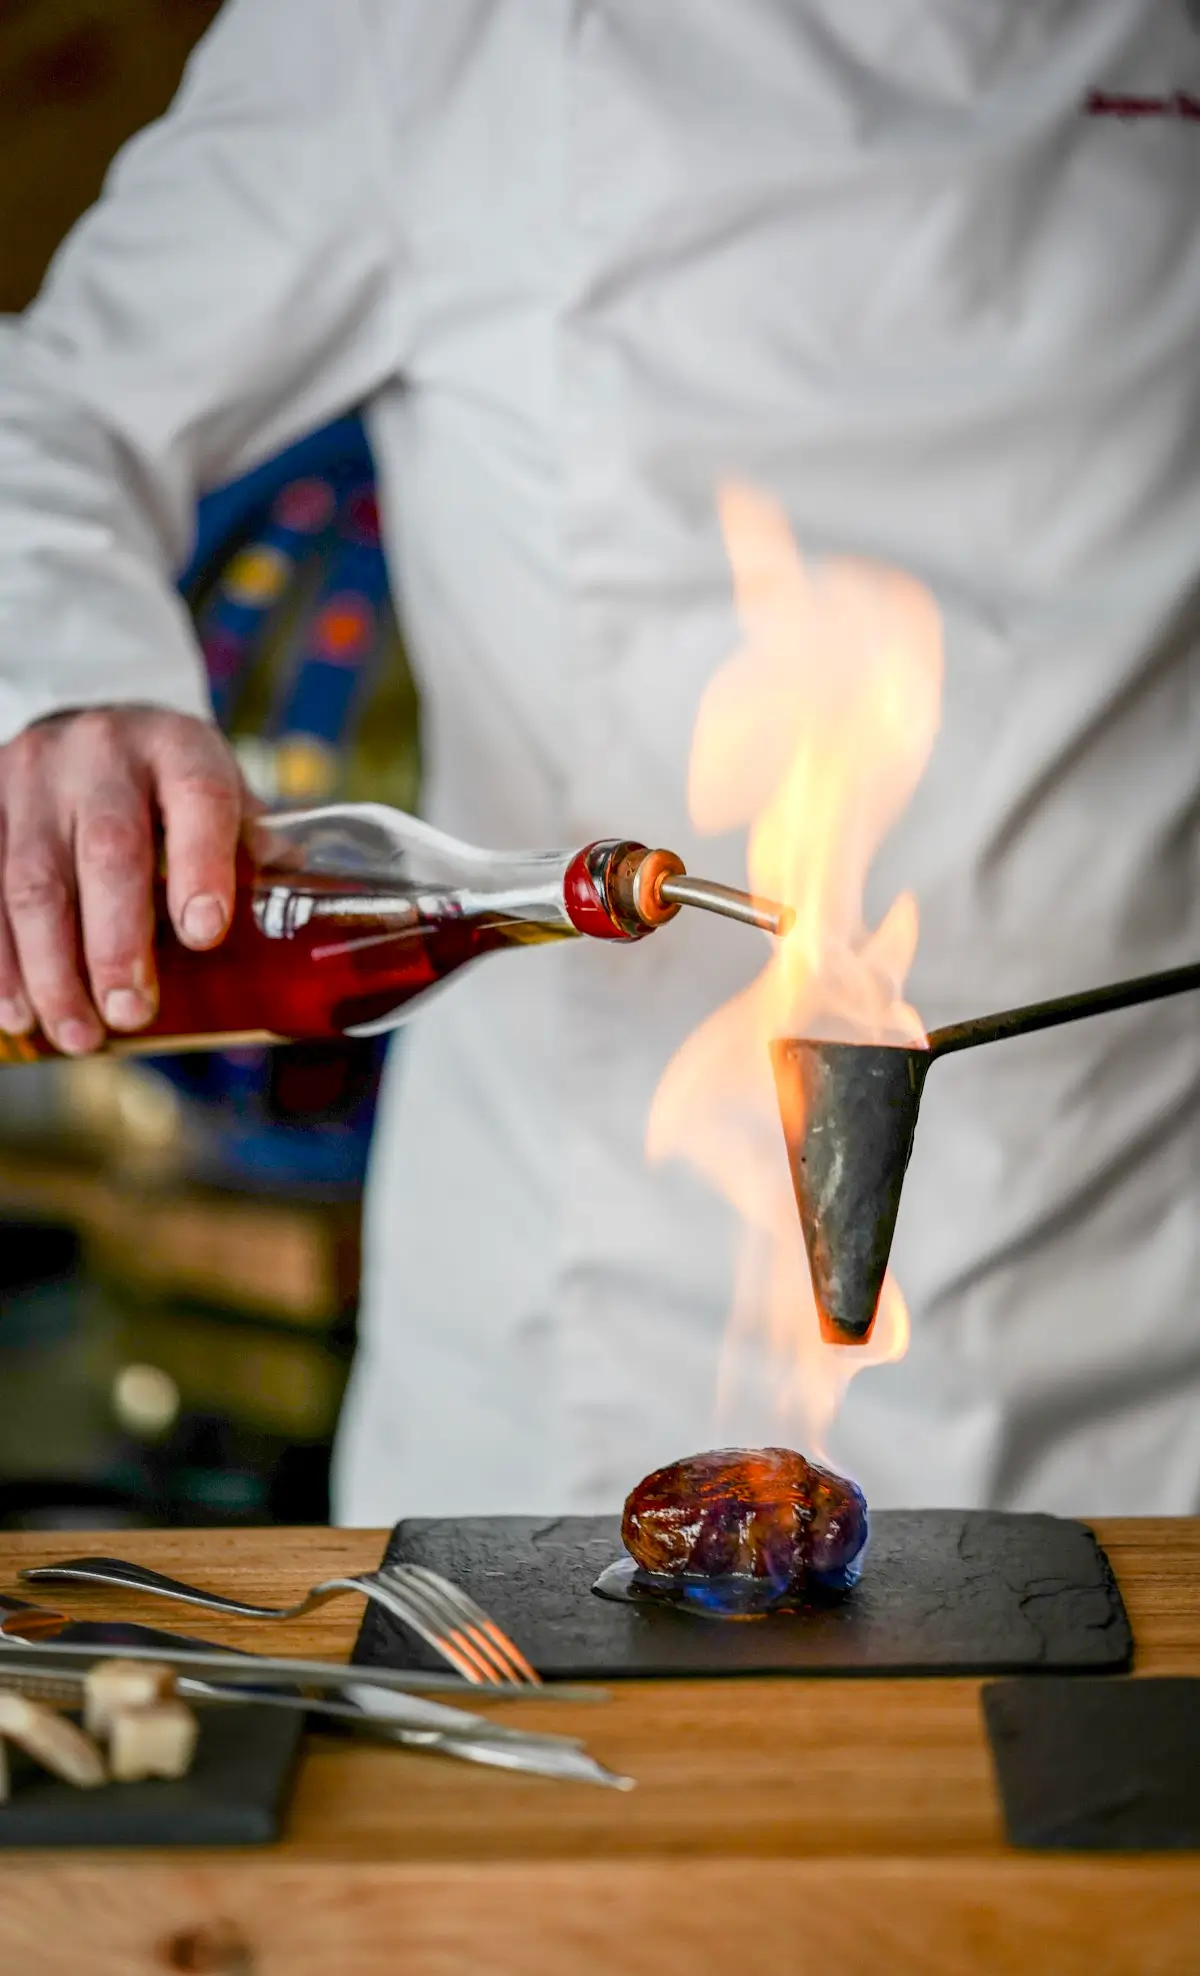 Chef using a torch to caramelize food at Jacques Faussat, a Michelin Star restaurant in Paris.